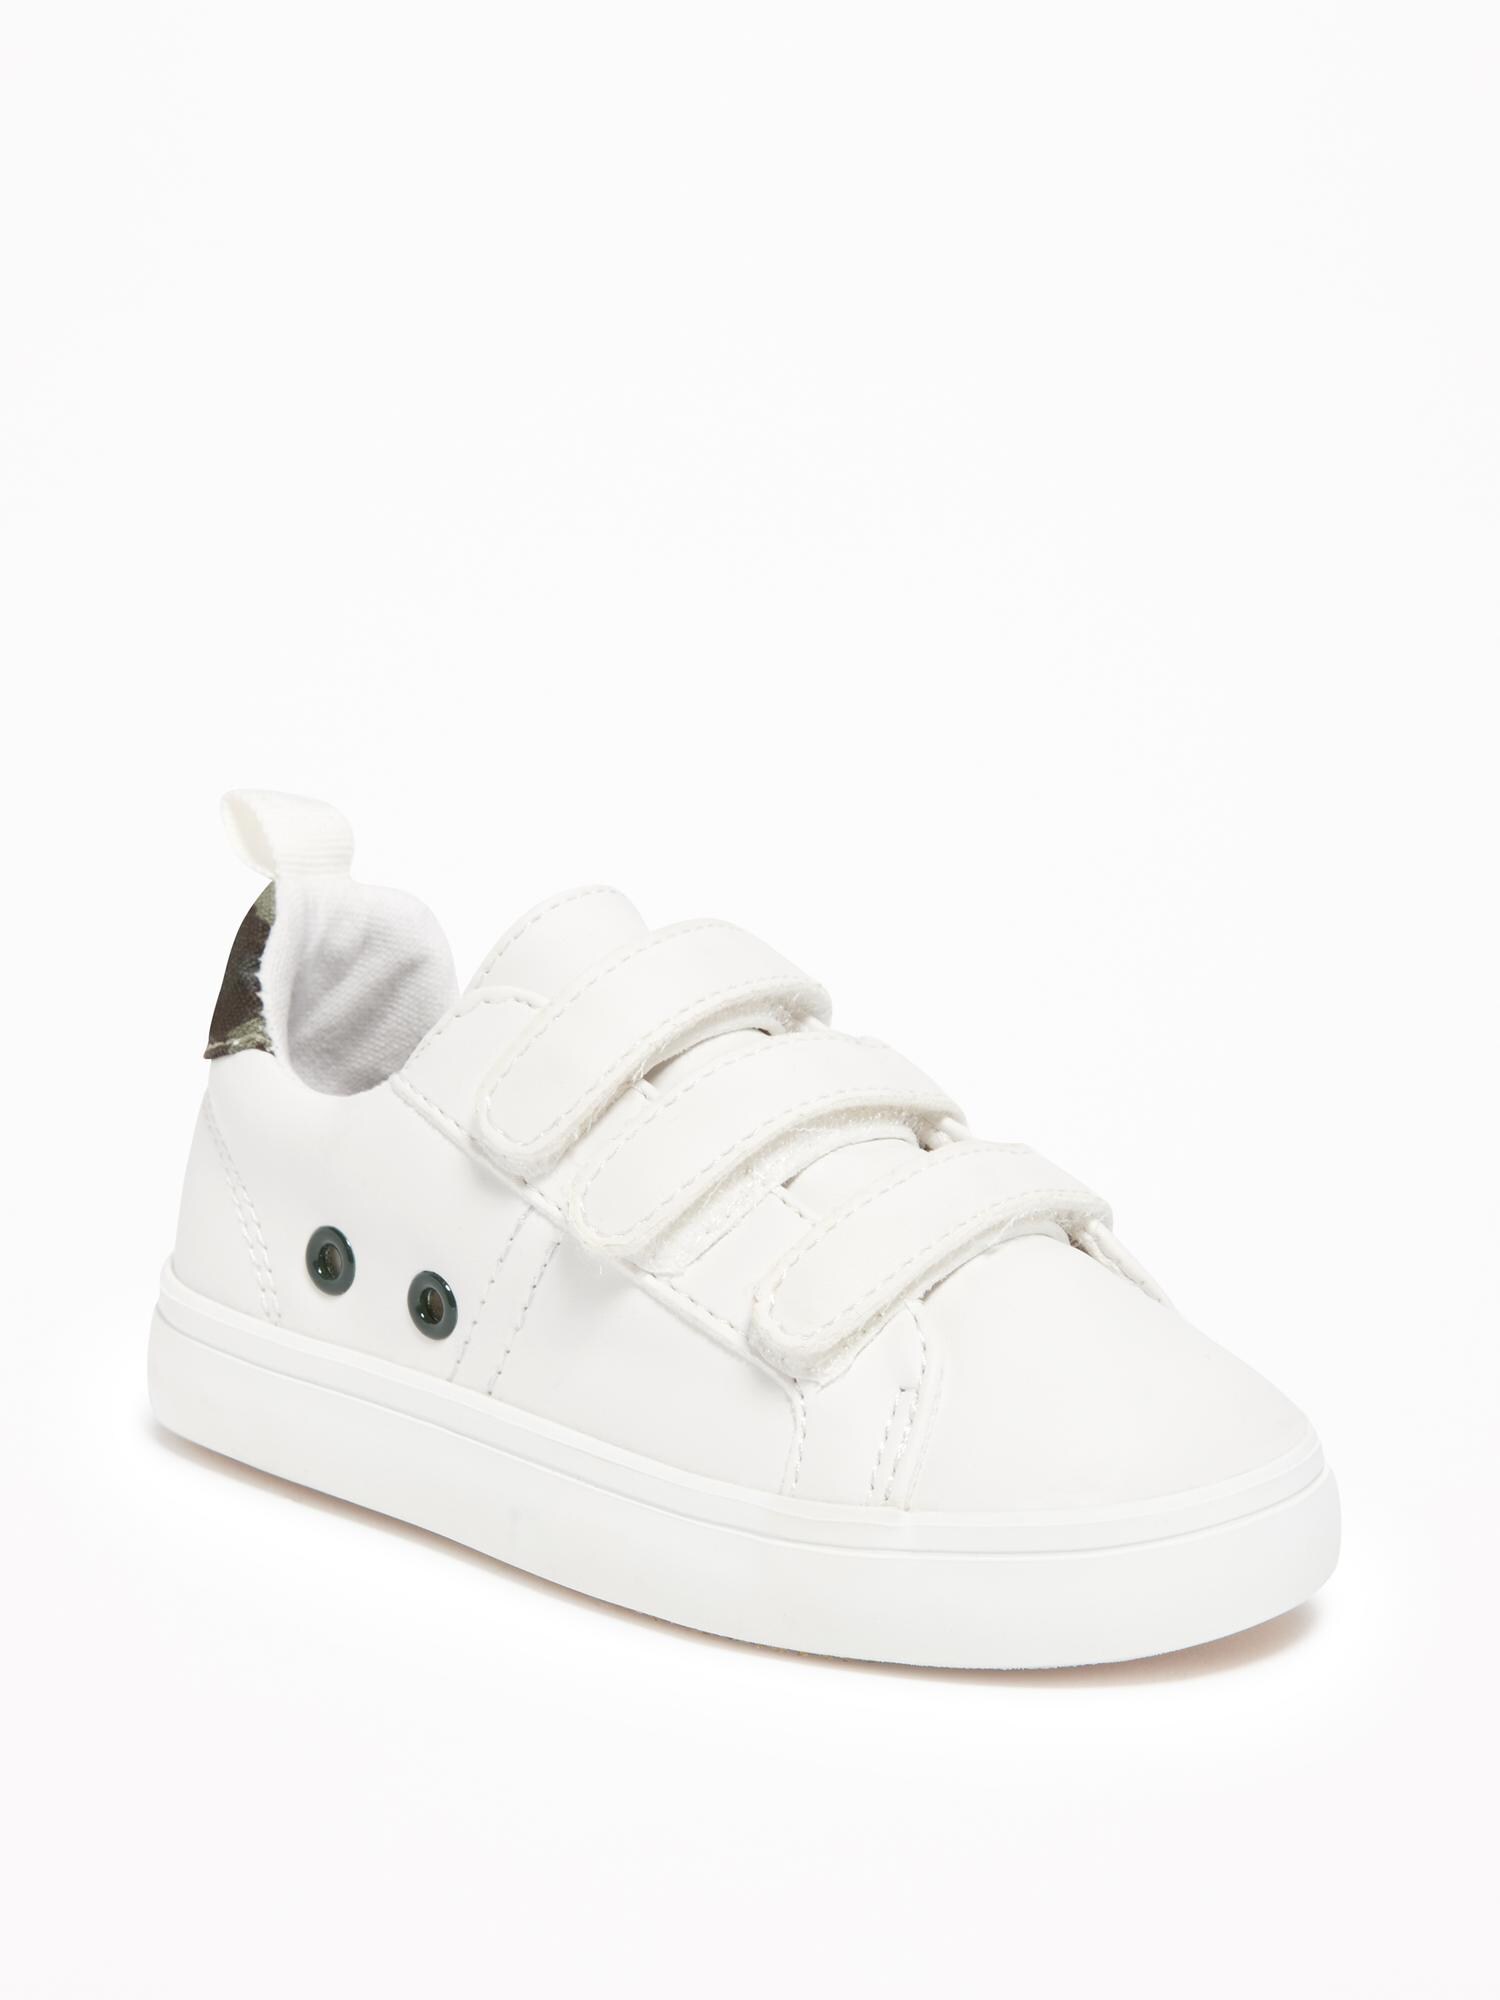 Secure-Close Sneakers For Toddler Boys | Old Navy